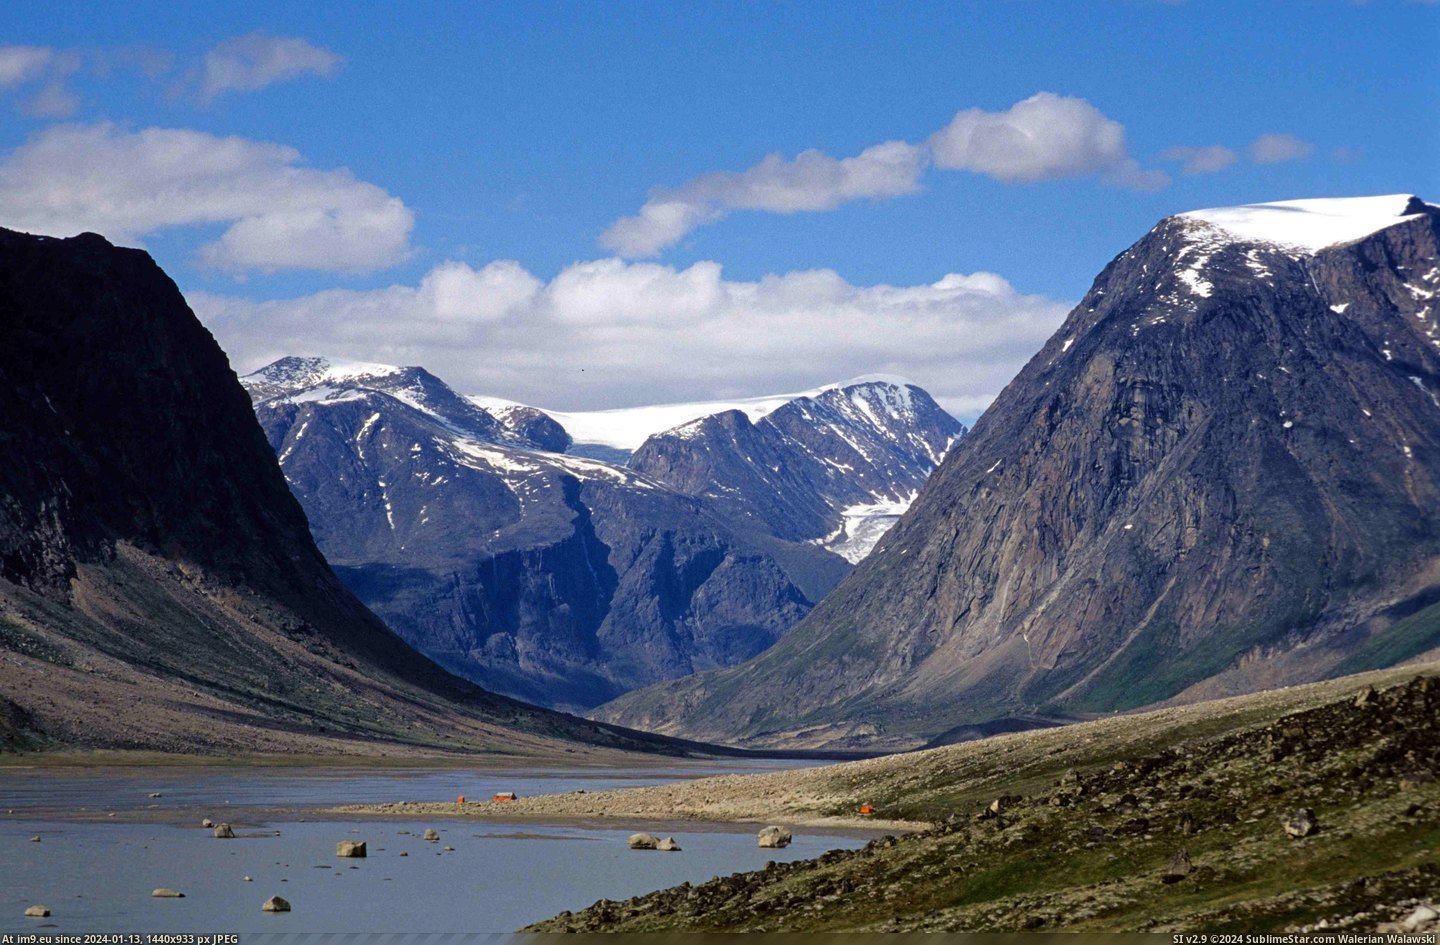 #Park #National #Auyuittuq #Fiord #Pangnirtung #Canada #Nunavut [Earthporn] Pangnirtung Fiord, Auyuittuq National Park, Nunavut, Canada [5280x3432] Pic. (Изображение из альбом My r/EARTHPORN favs))